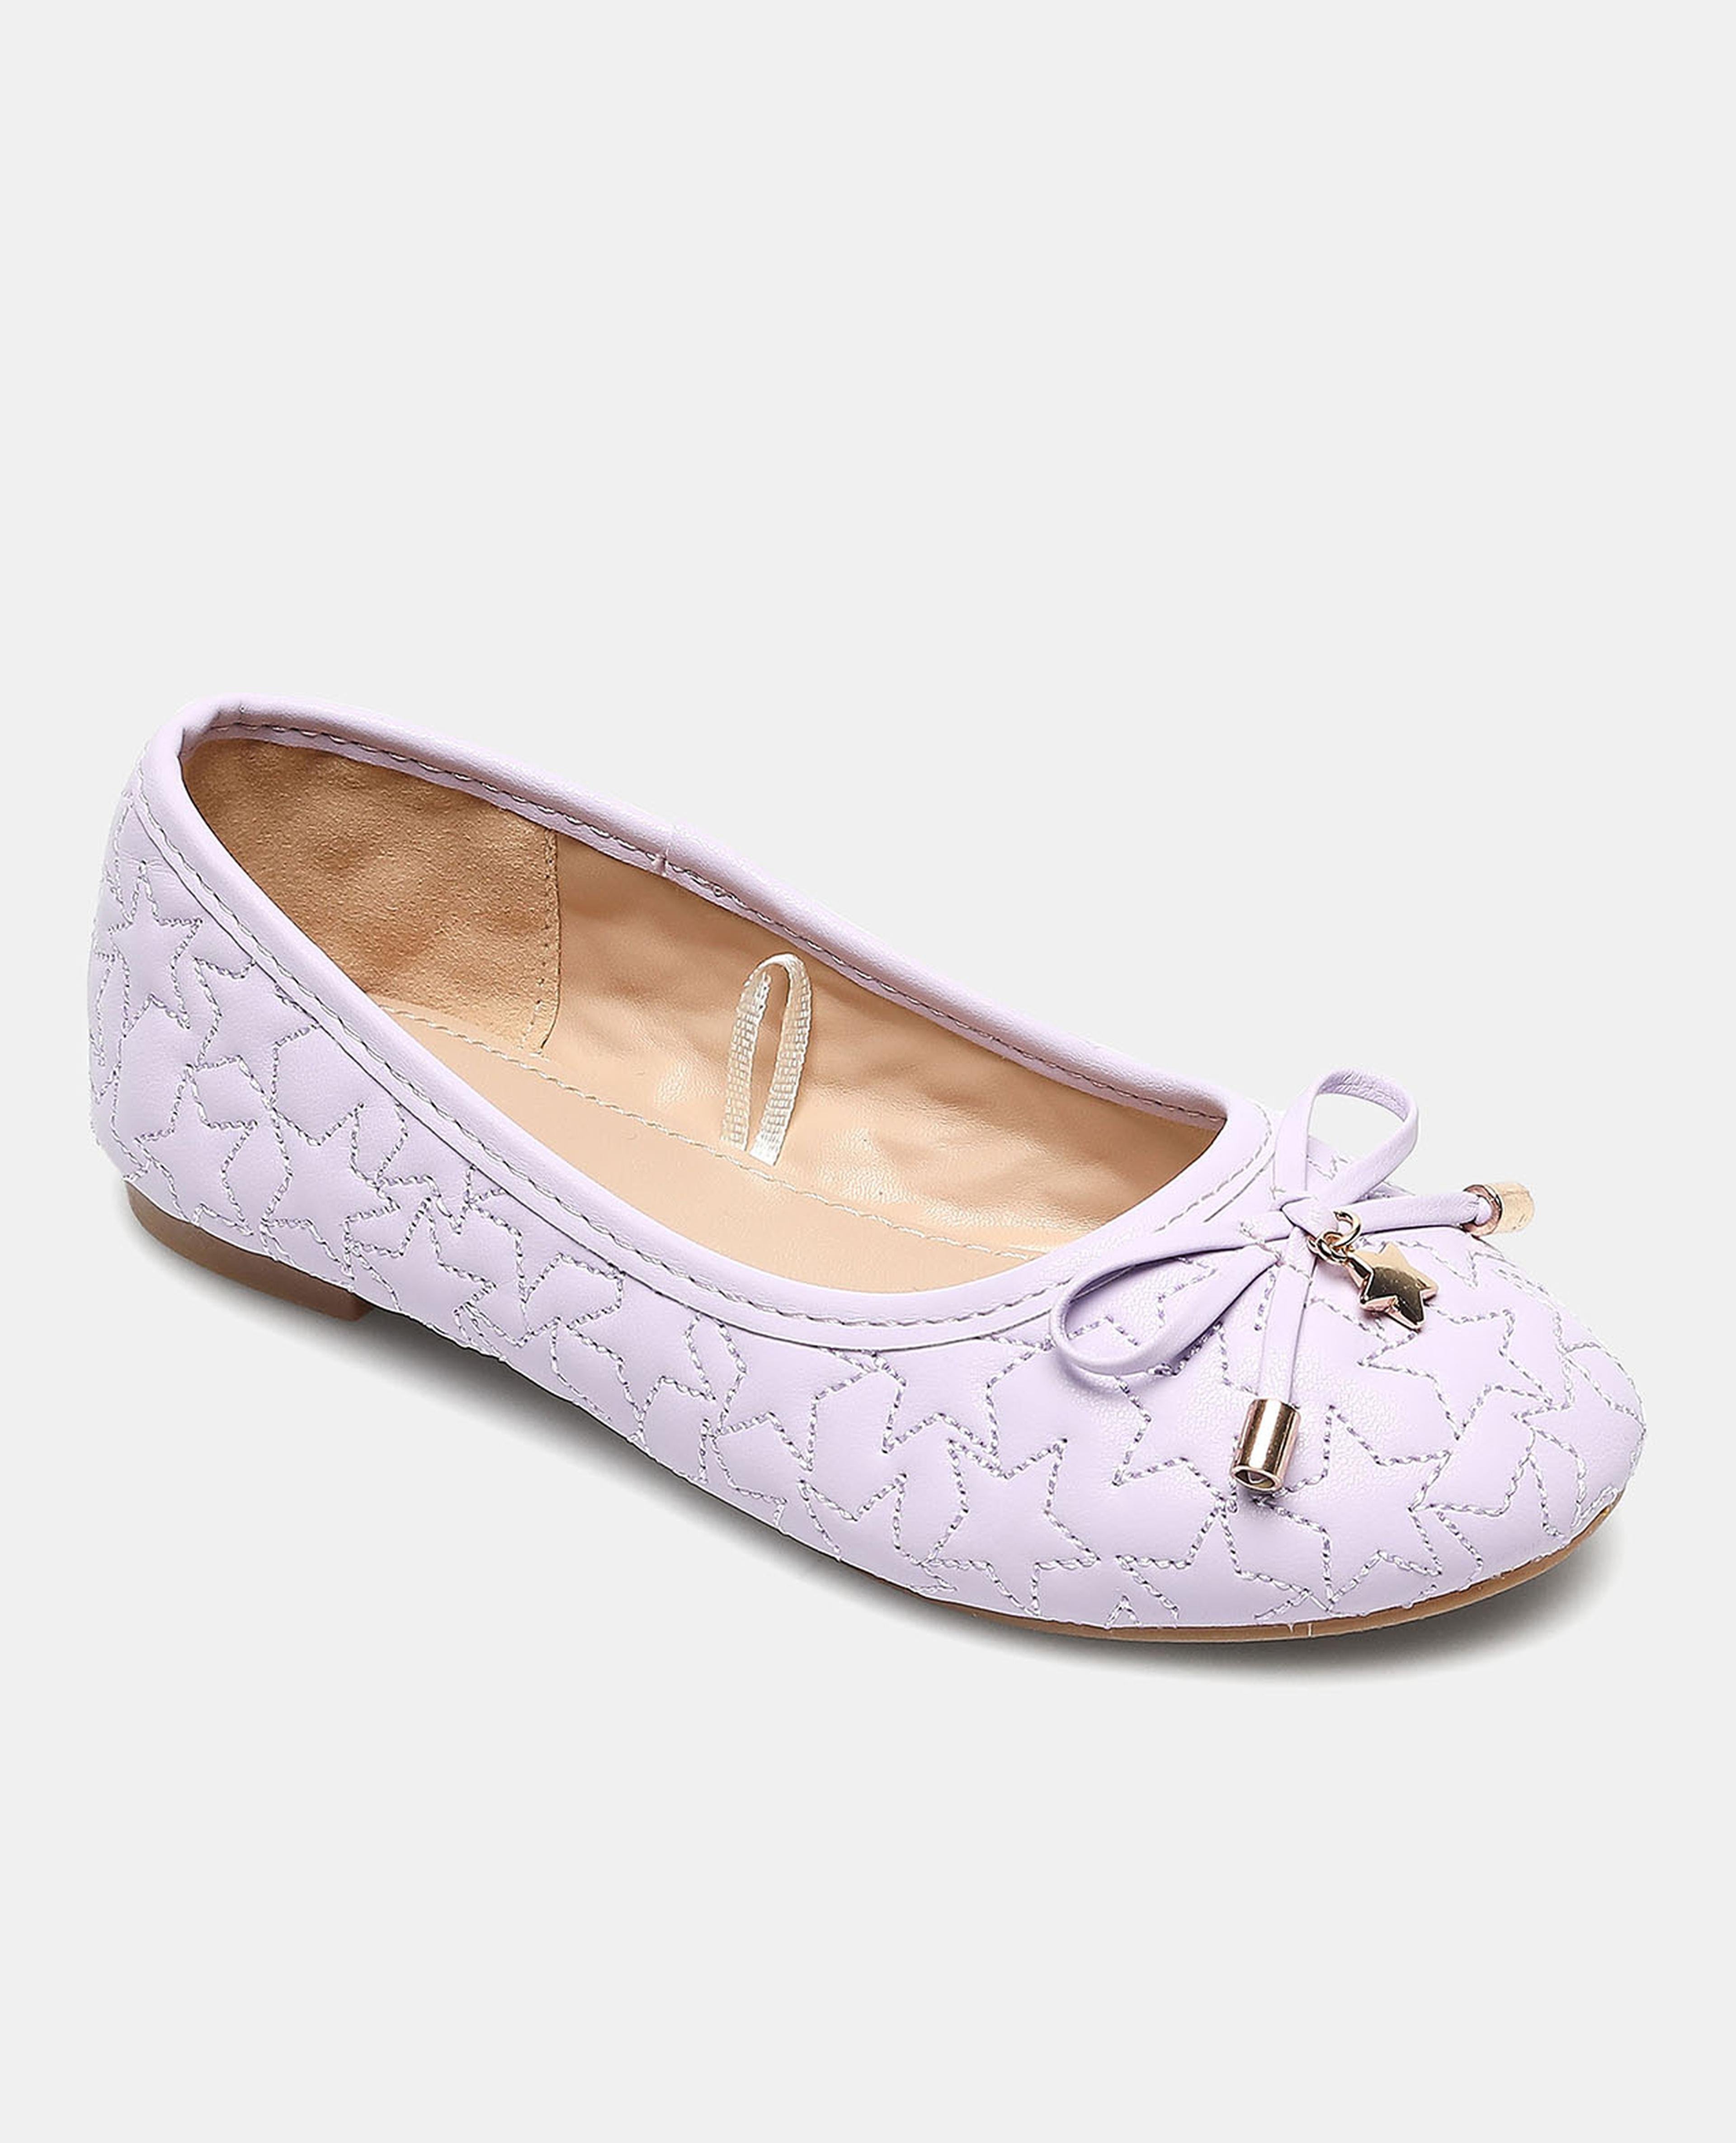 Embroidered Round Toe Ballerinas with Bow Detail